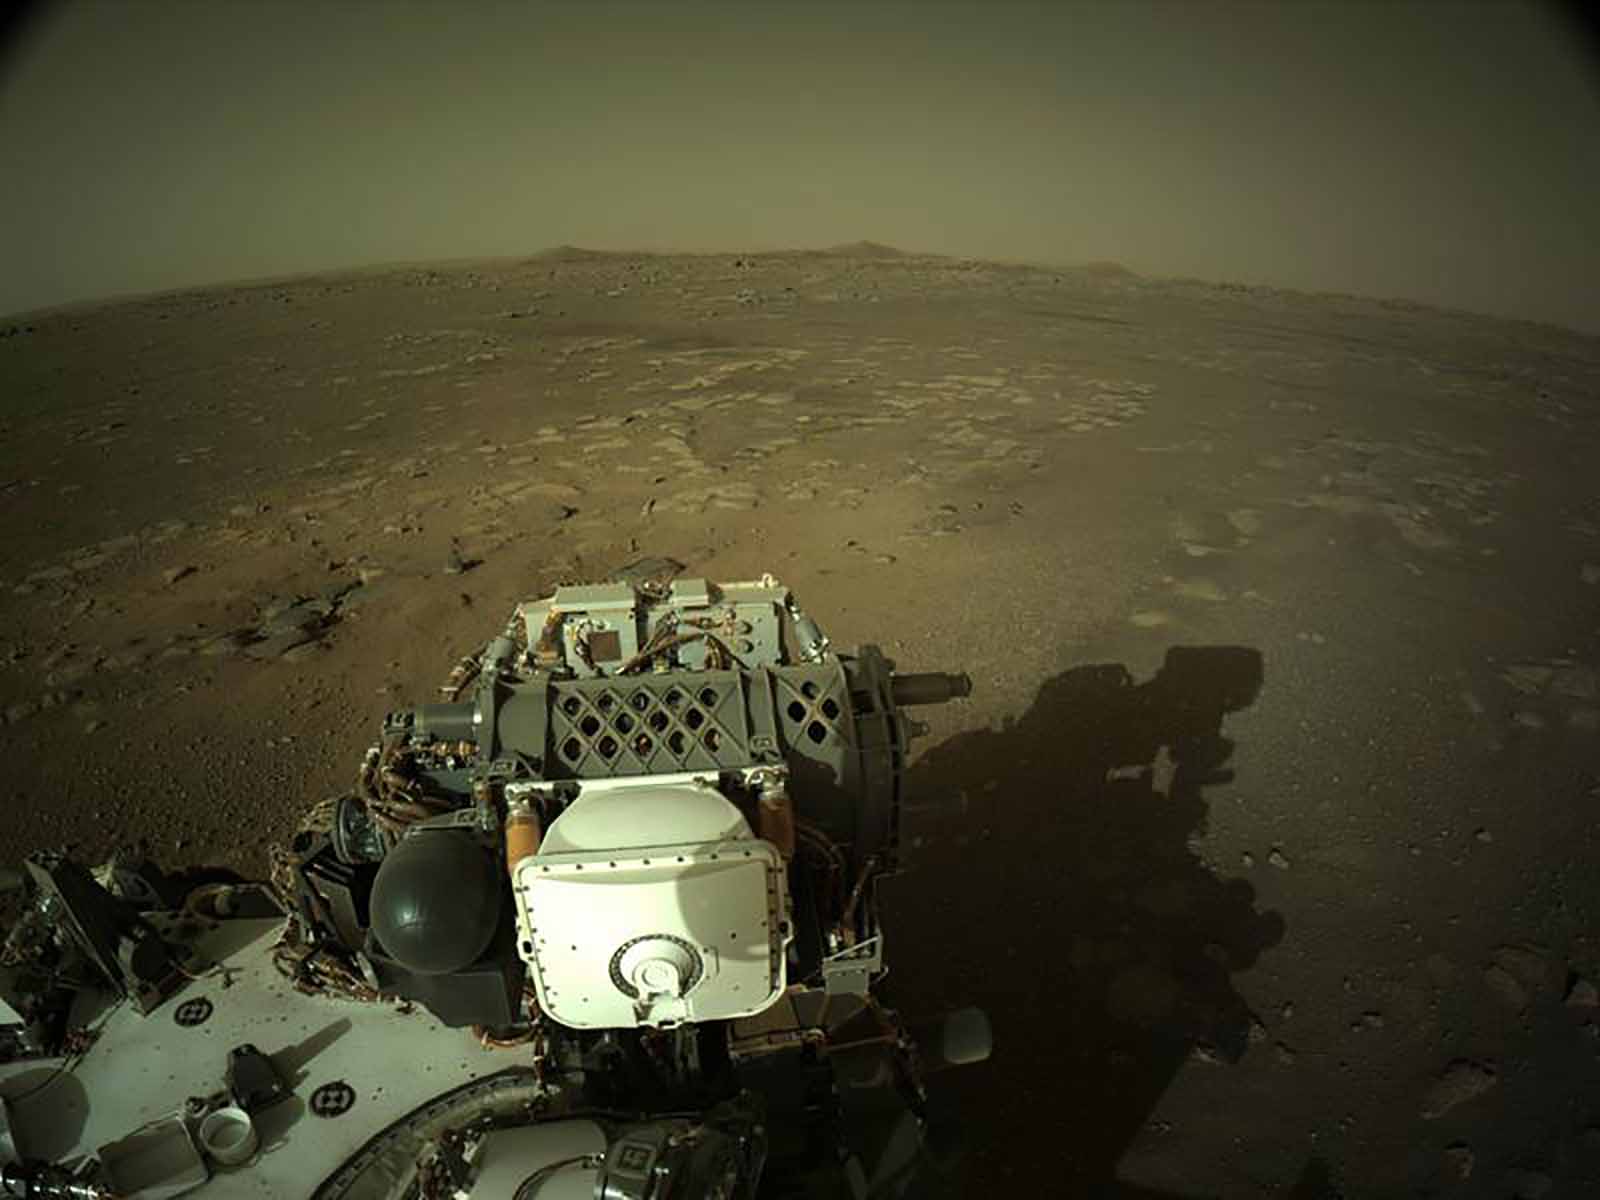 What's life on Mars like for NASA's rover Perseverance? See what the red giant looks like from the newest rover's perspective.